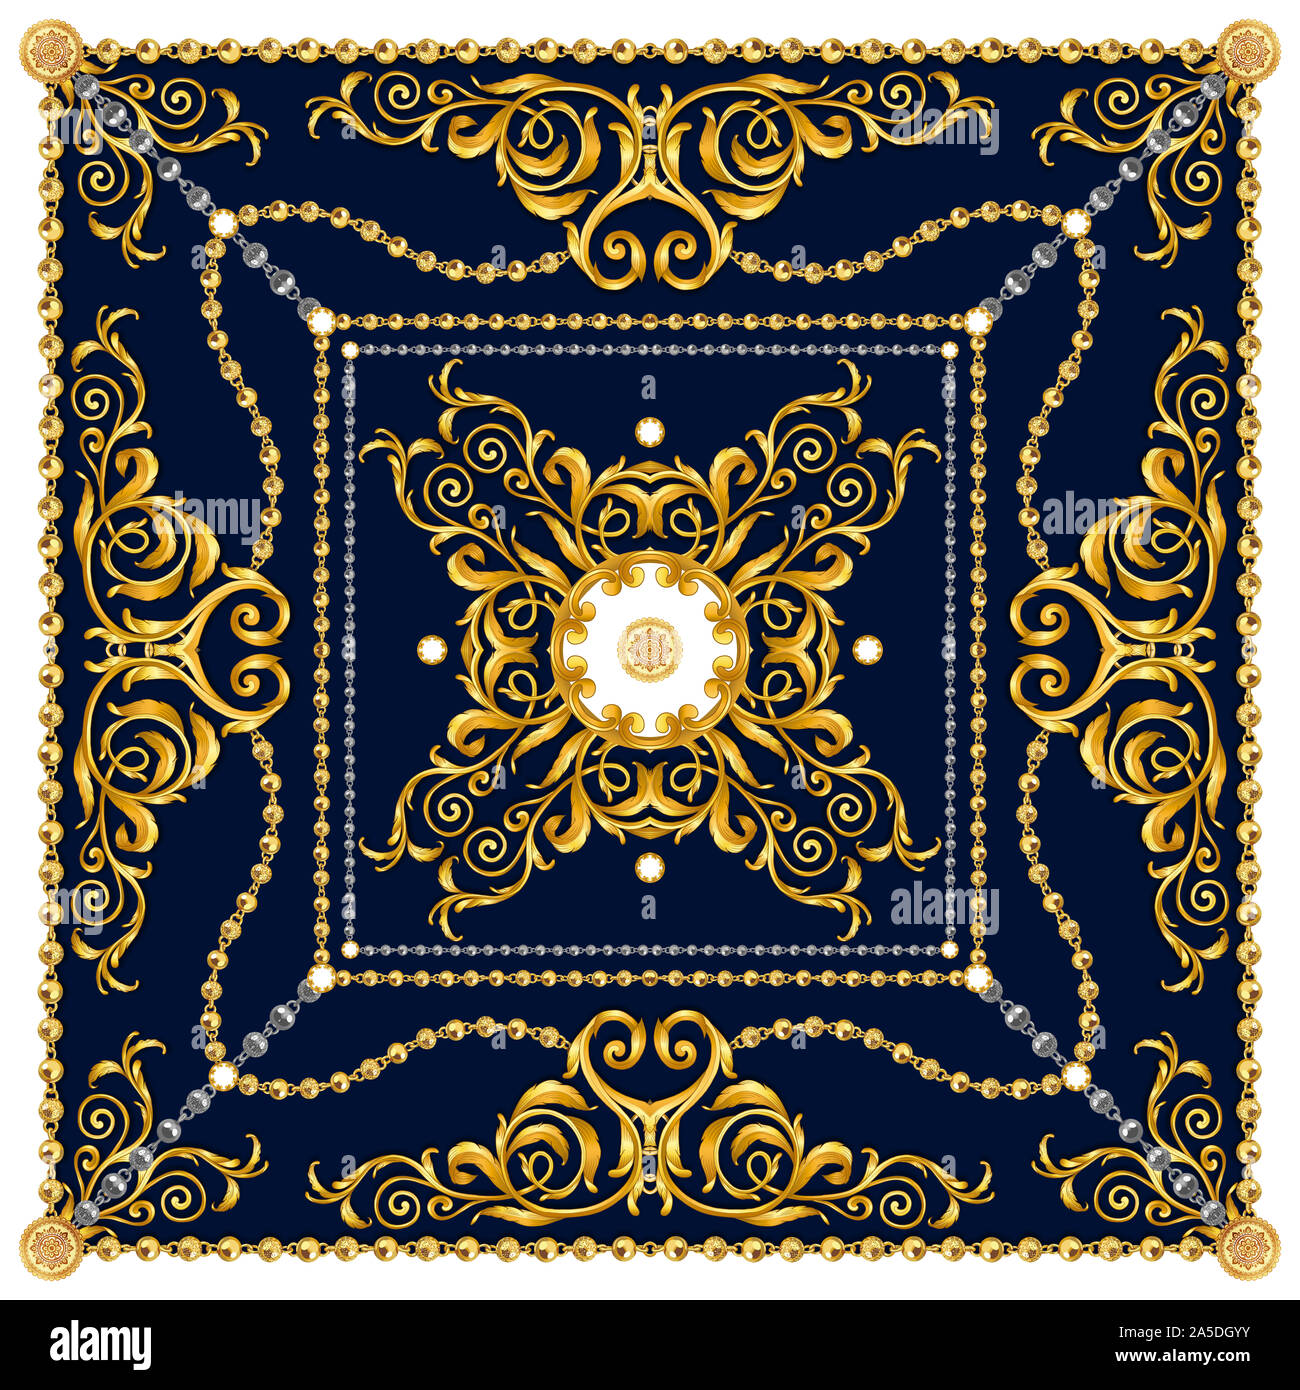 versace style scarf